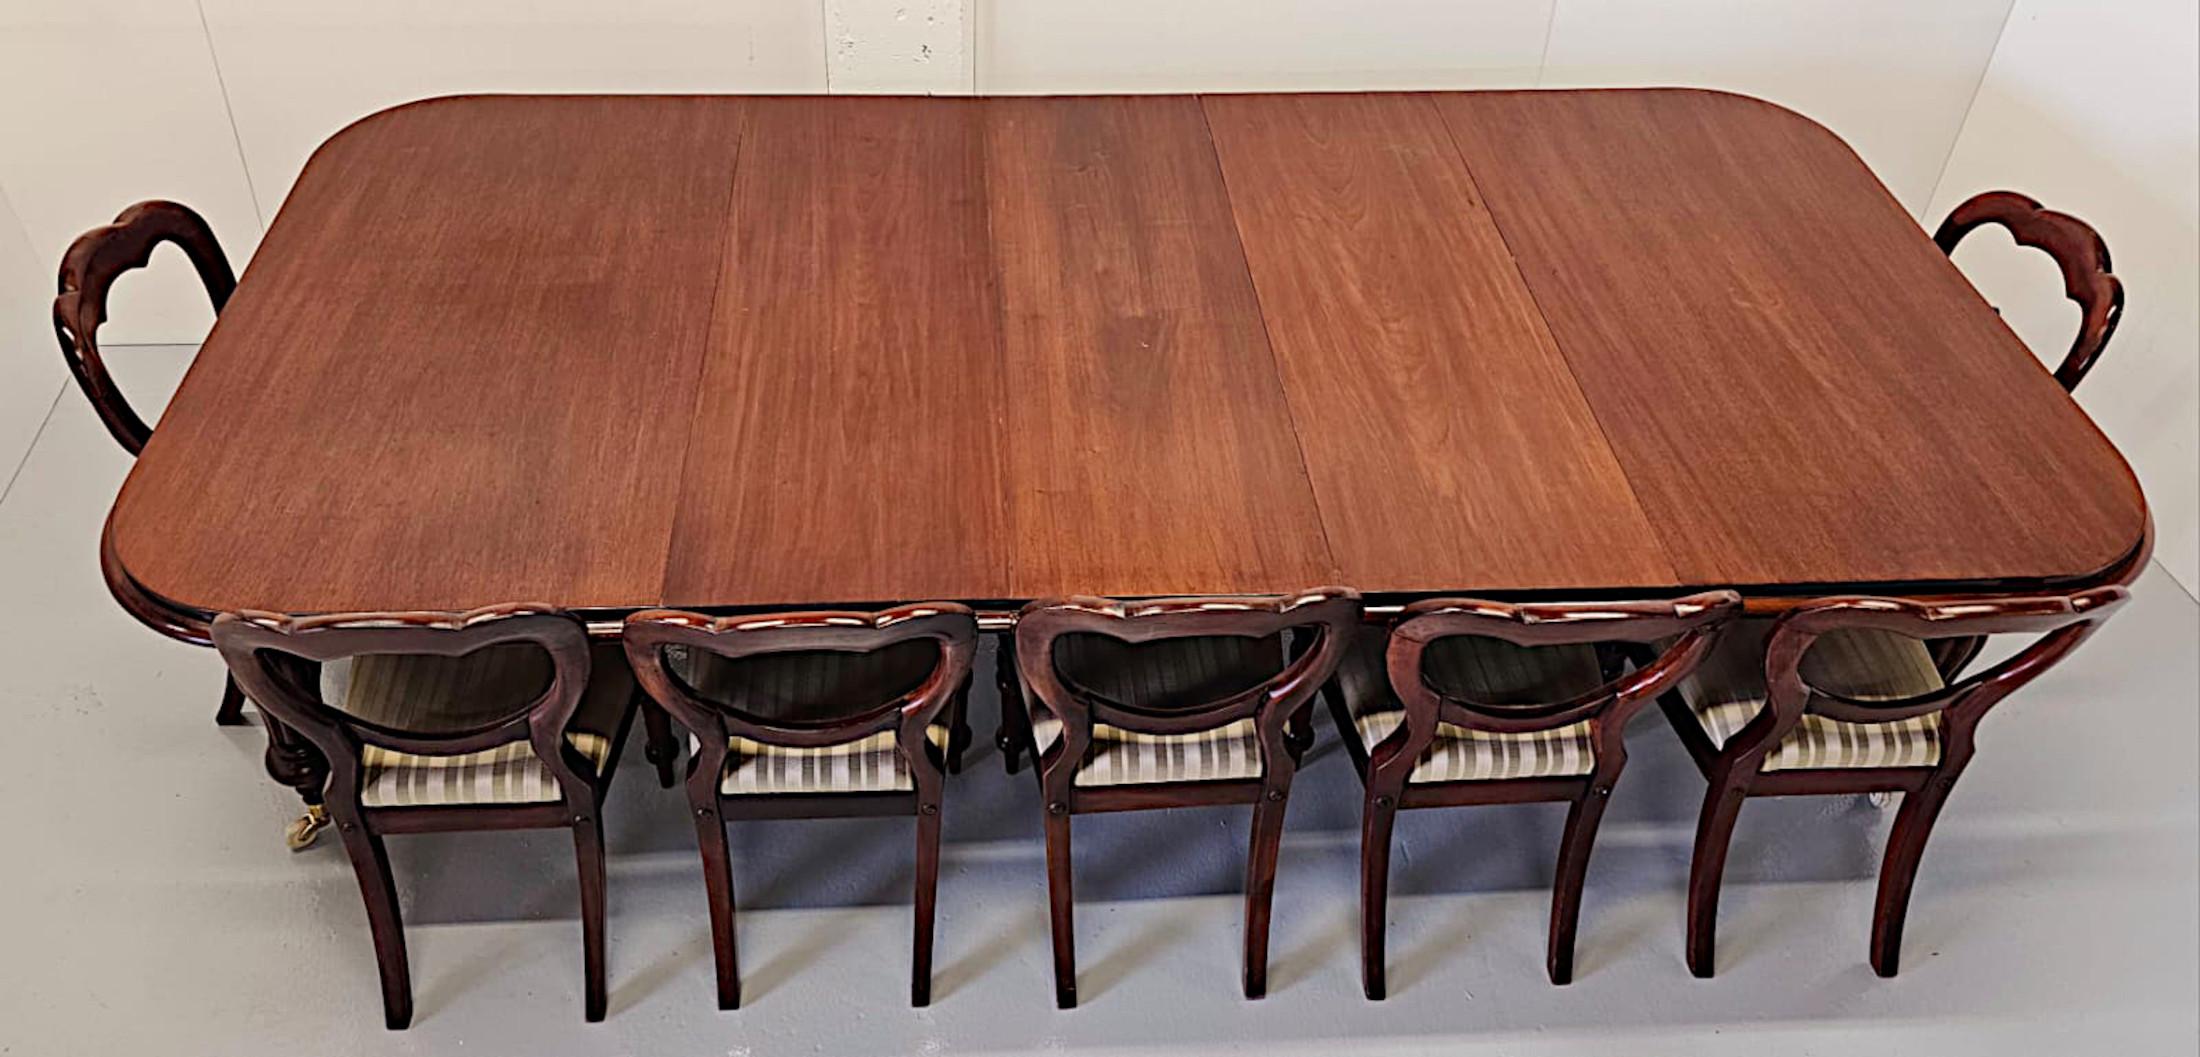  A Fine 19th Century Dining Table  For Sale 7